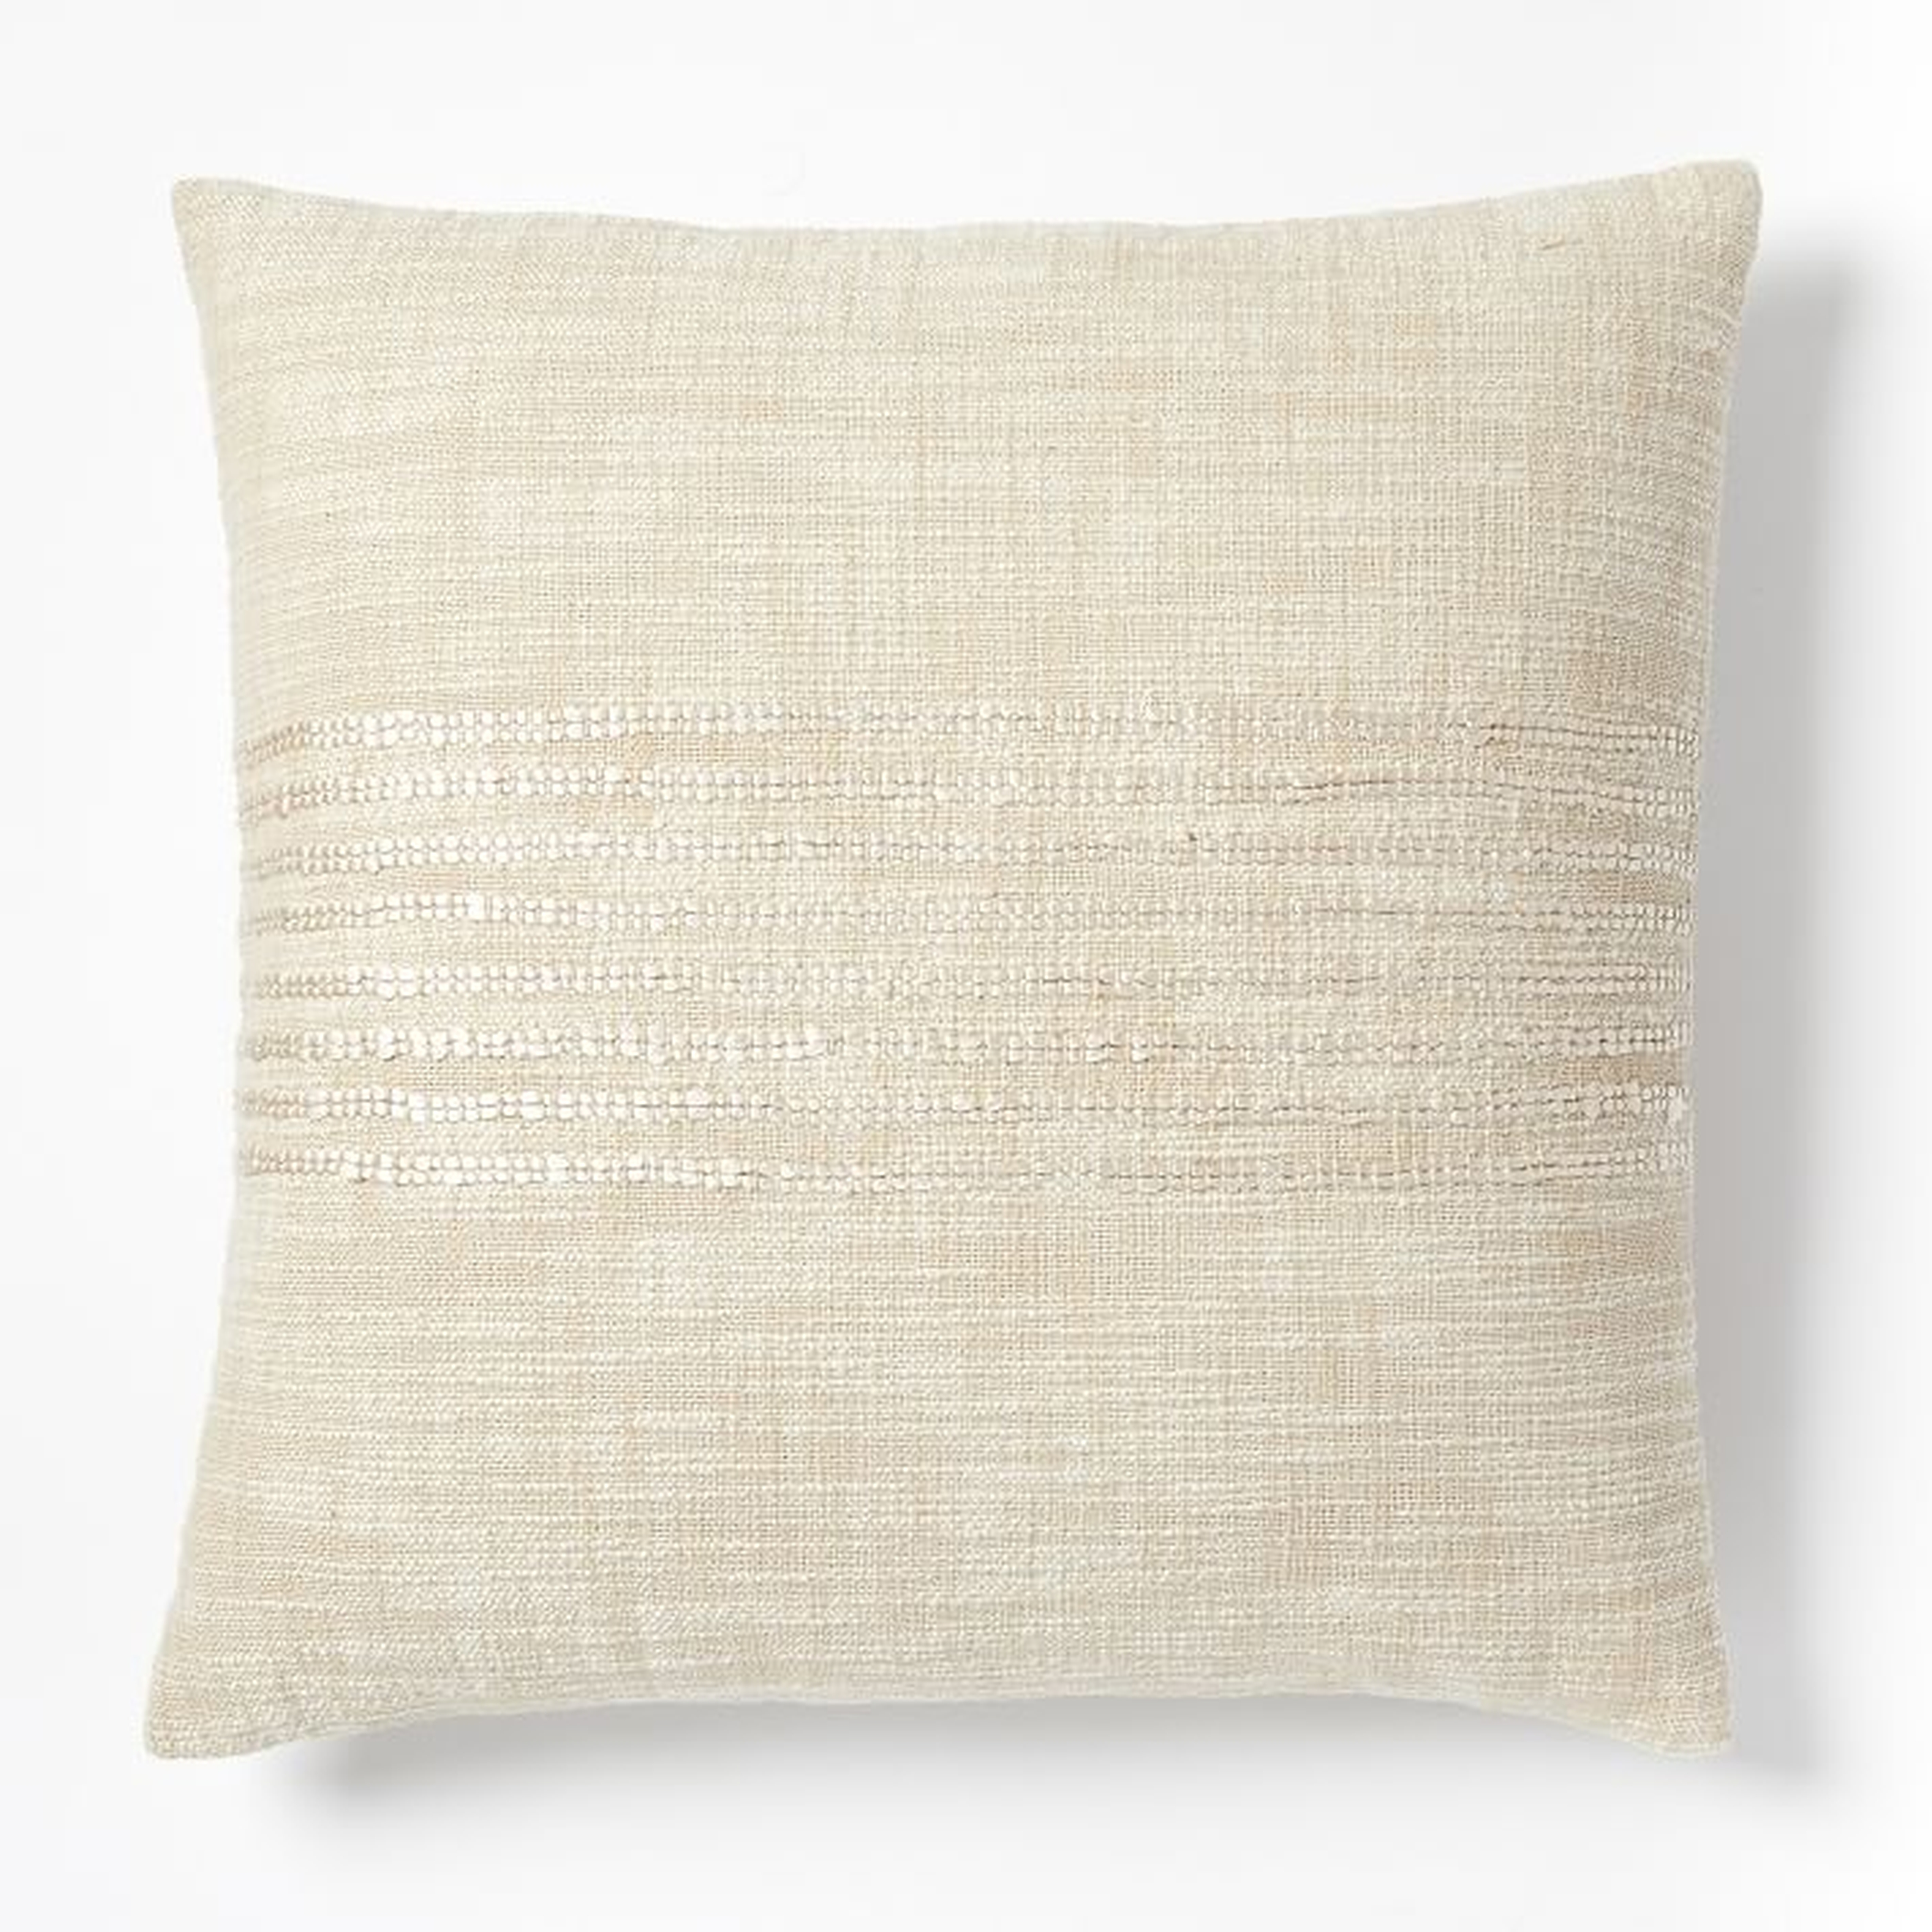 Texture Stitched Pillow Covers - West Elm